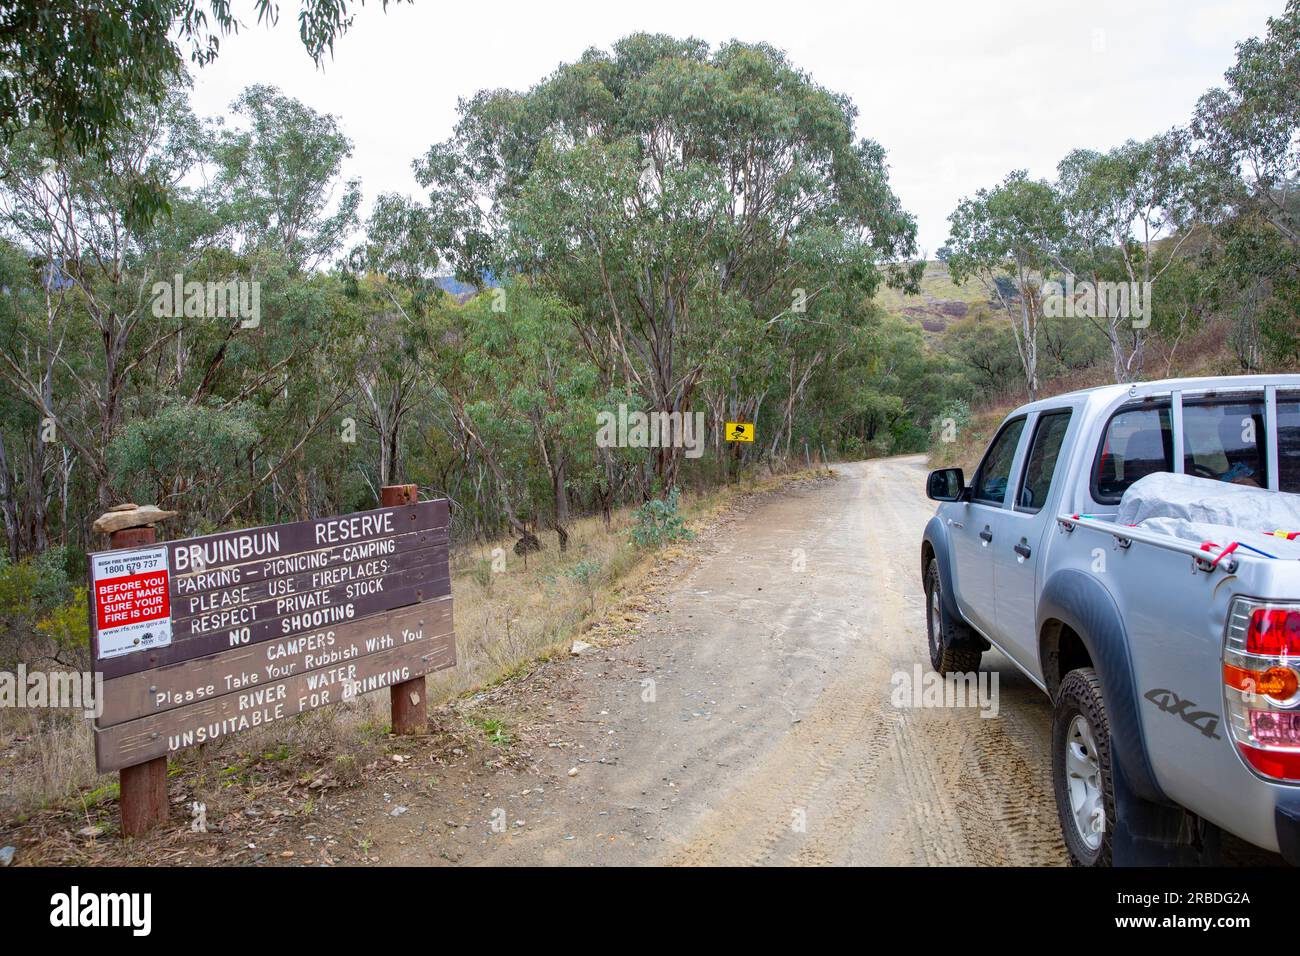 The Bridle track between Bathurst and Hill End, 4x4 ute passes by Bruinbun reserve a camping and picnic area next to the trail, New South Wales Stock Photo